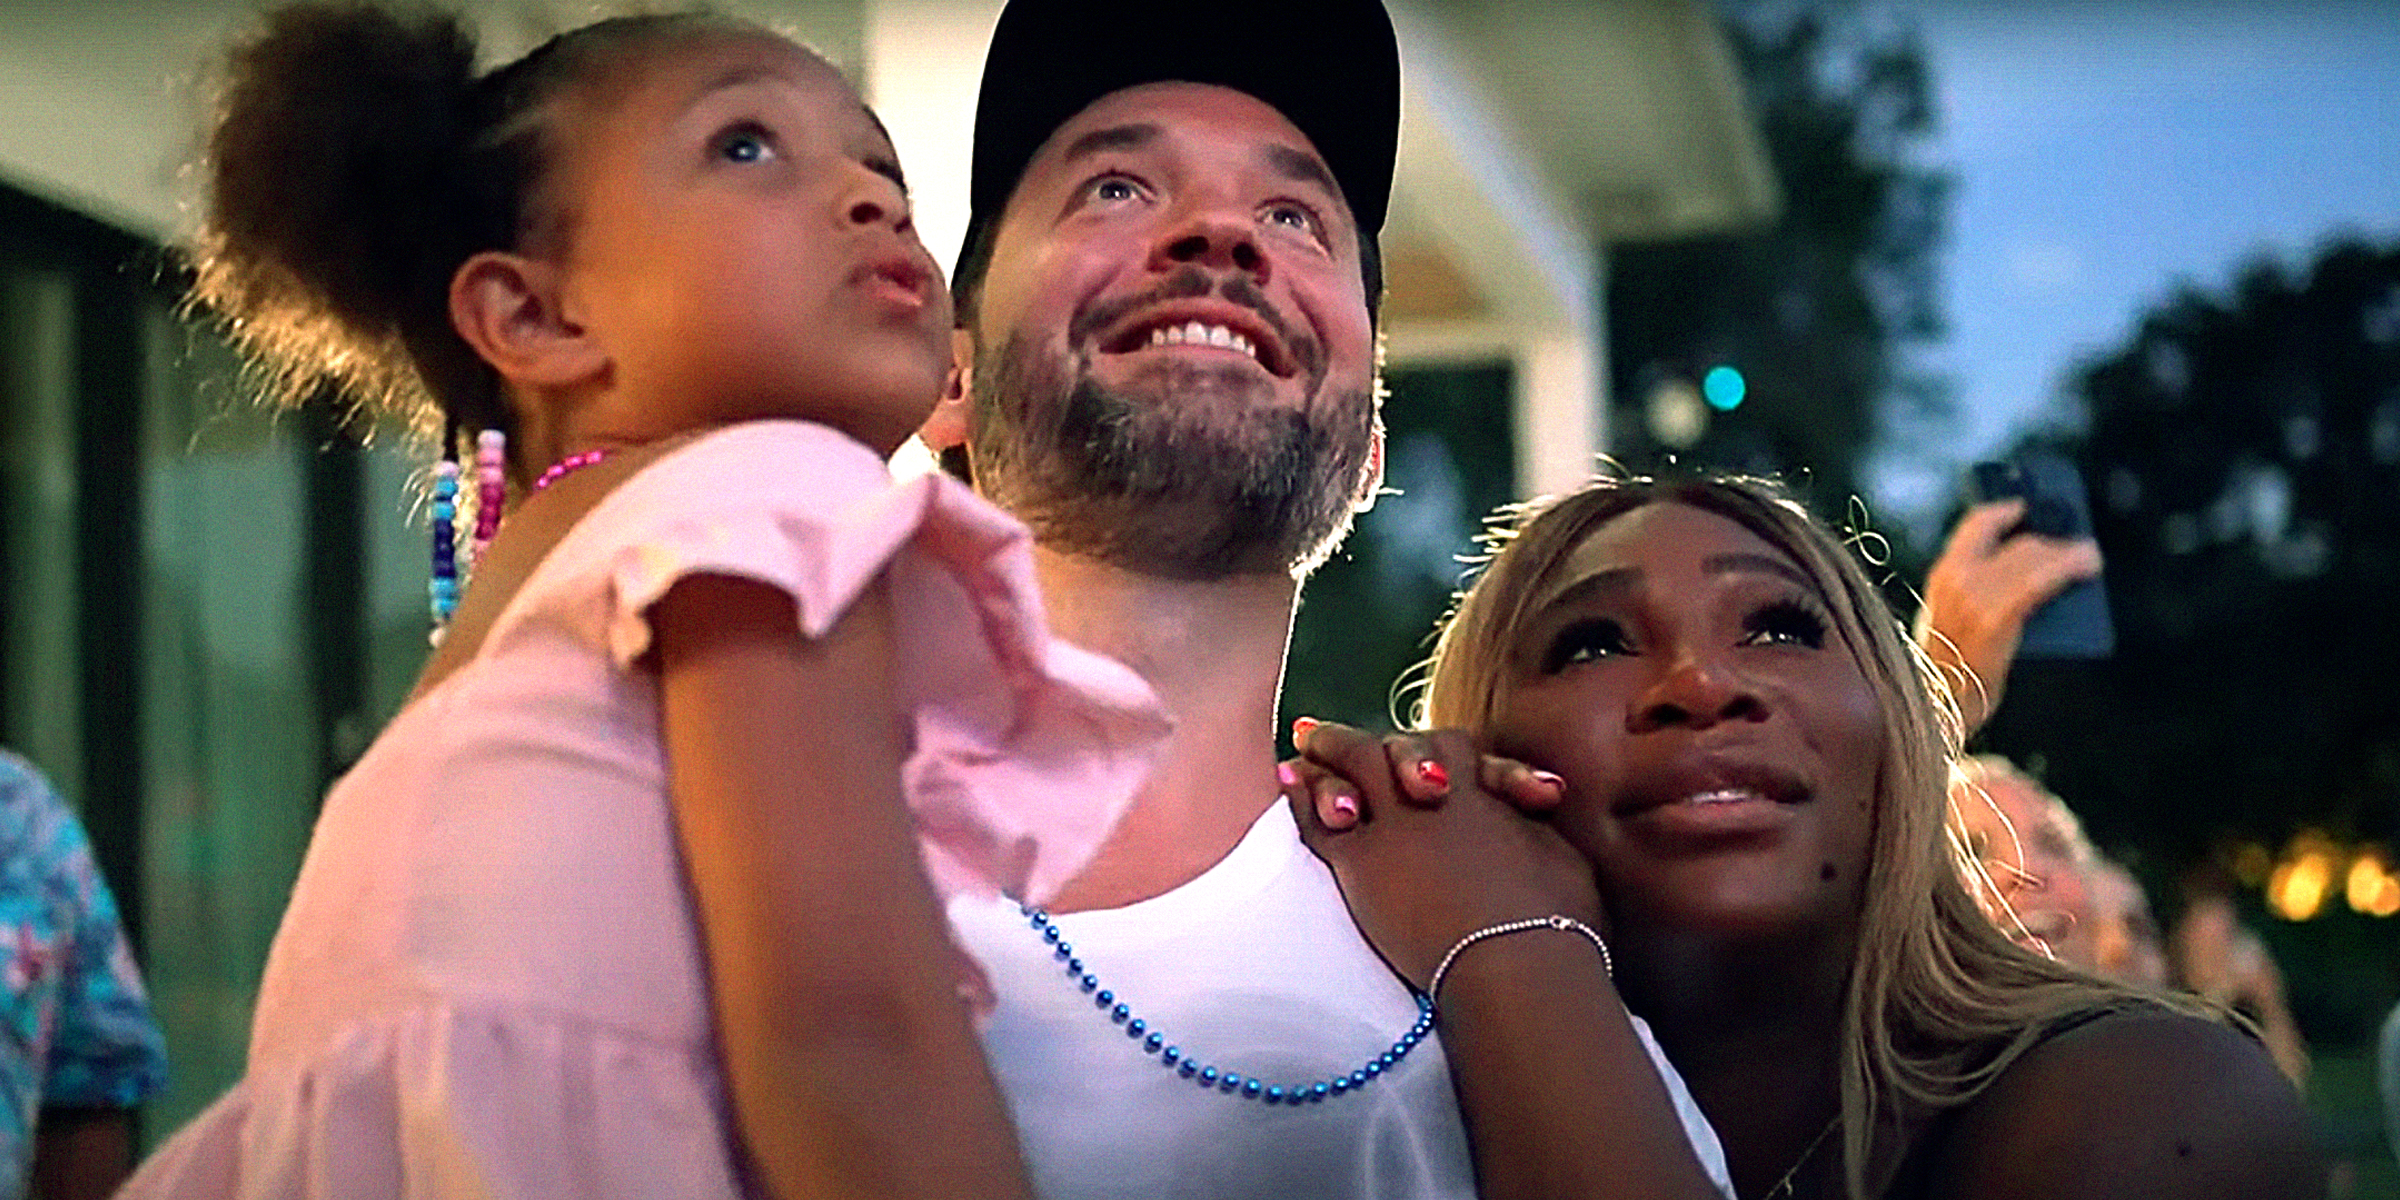 Serena Williams, Her Husband Alexis and Their Daughter. | Source: Youtube/SerenaWilliams